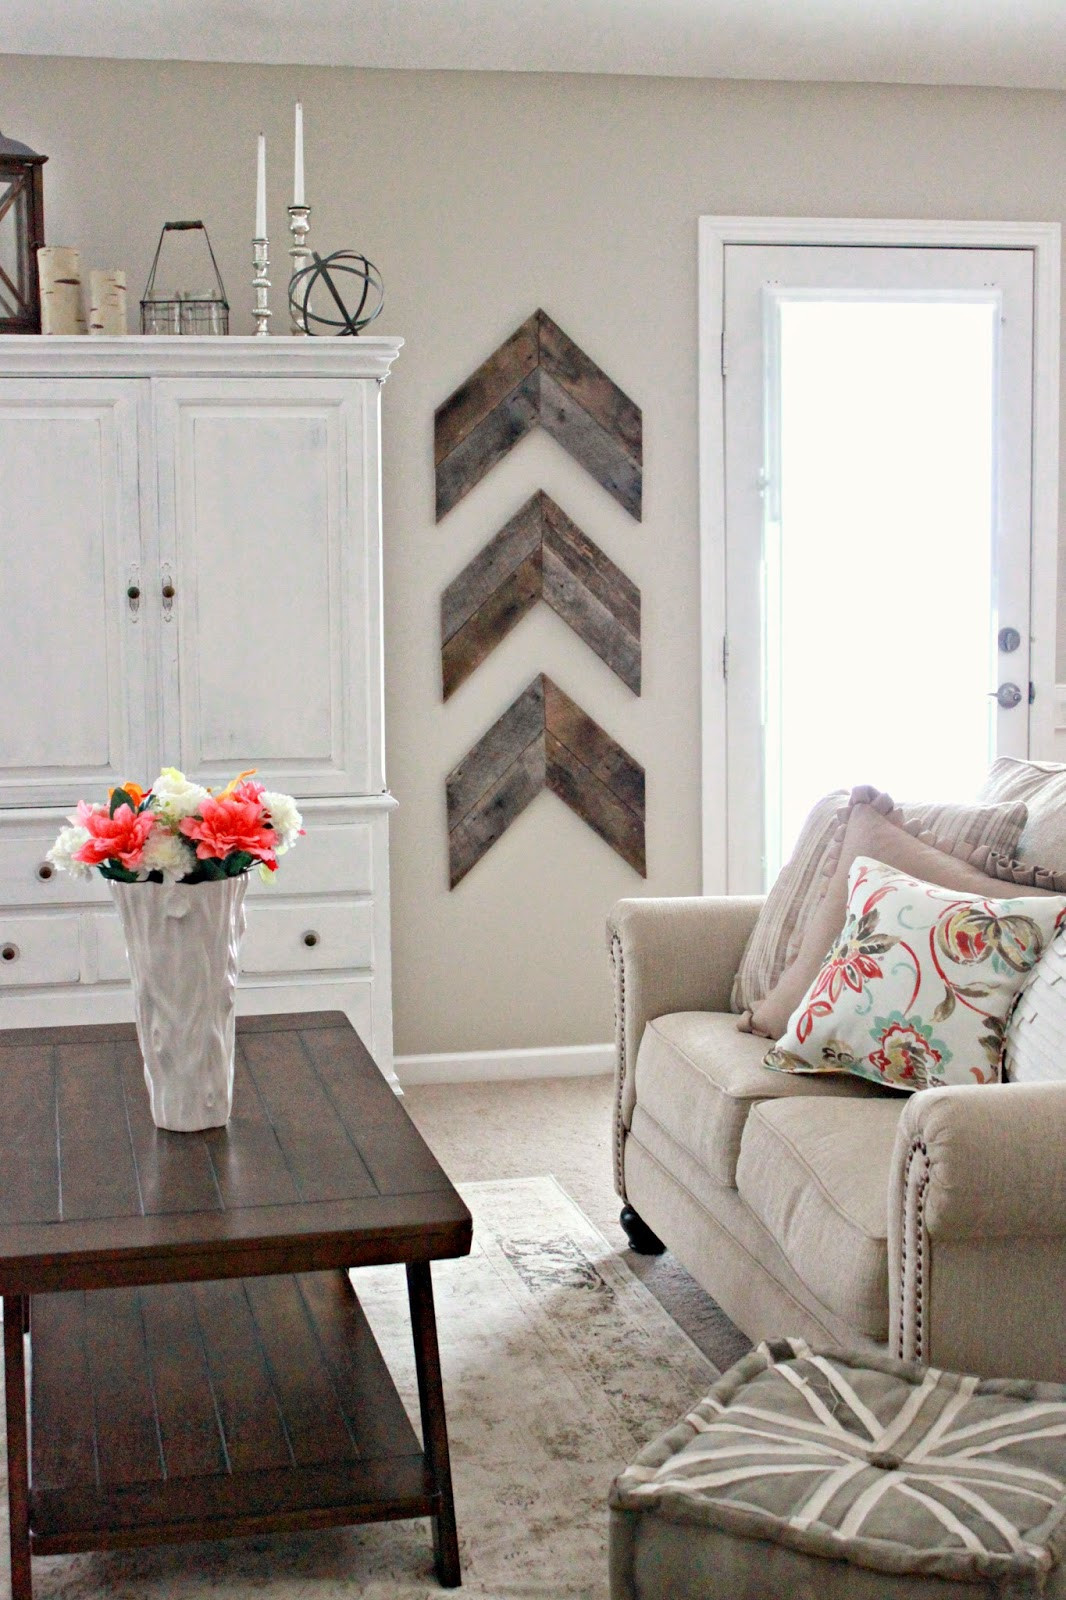 Living Room Decor Diy
 15 Striking Ways to Decorate with Arrows